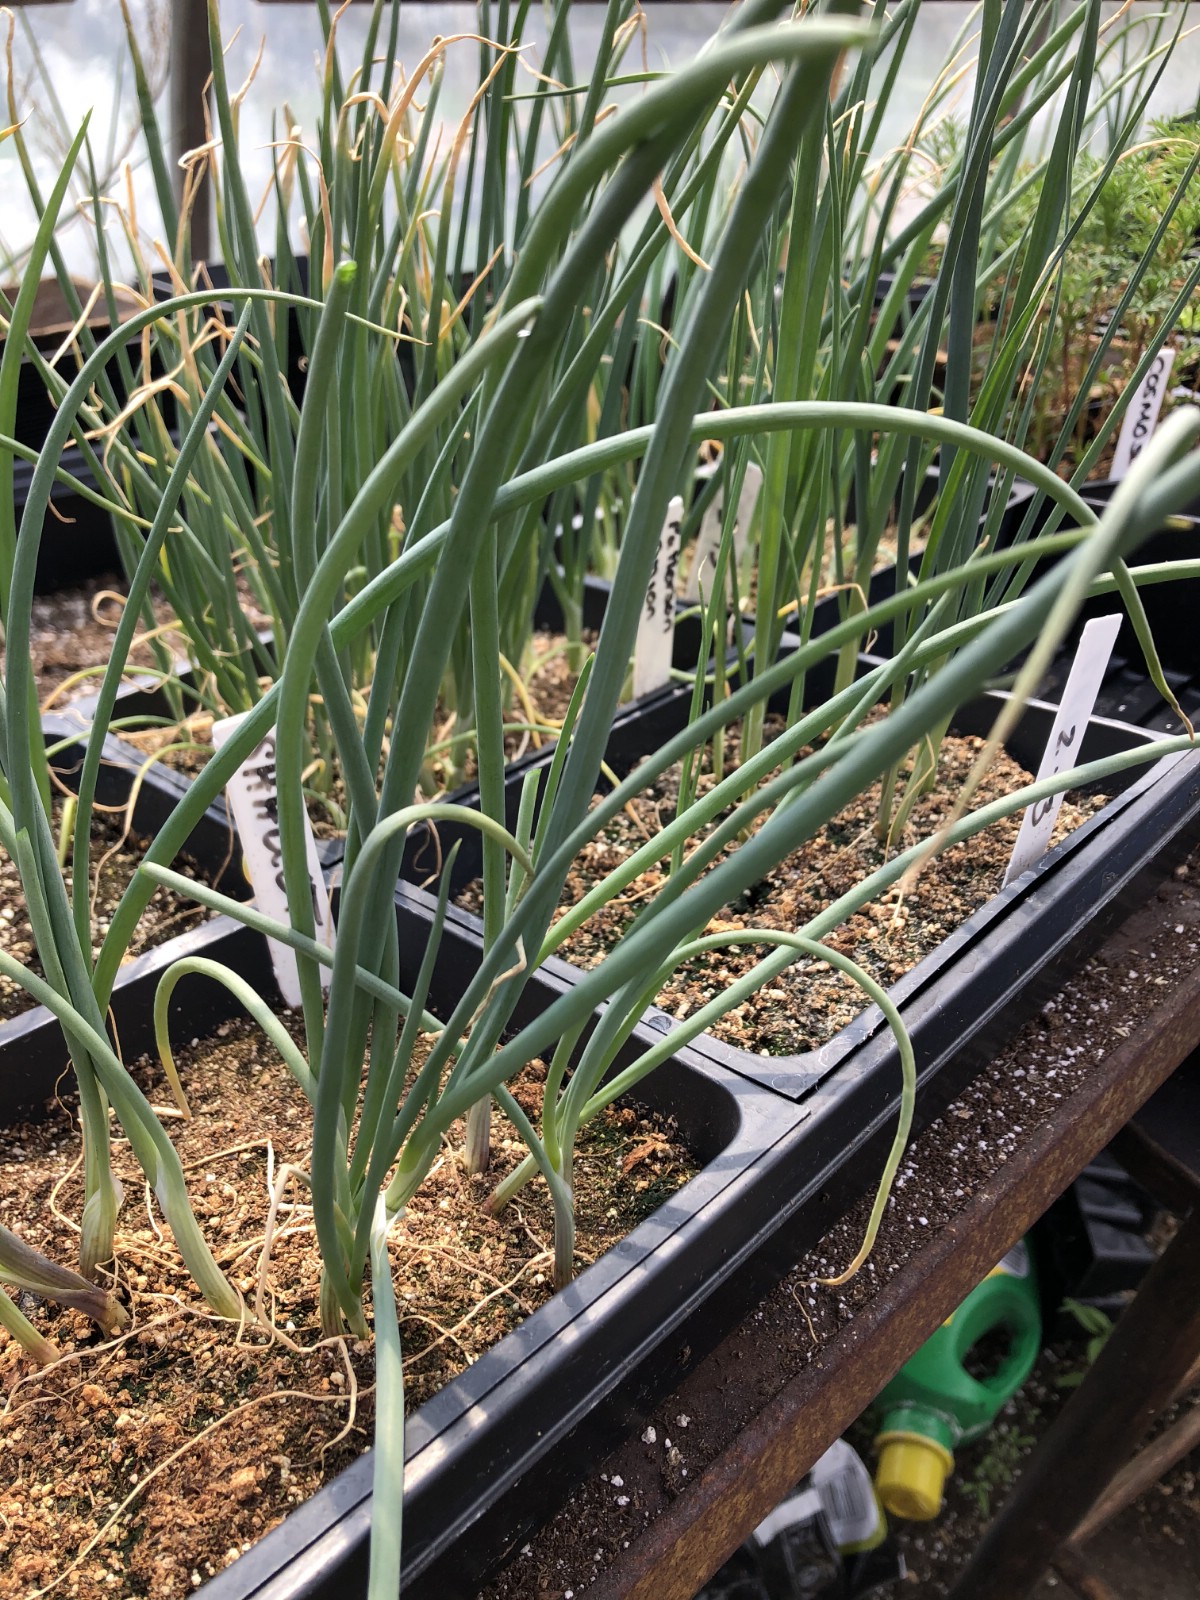 onions transplants in need of trimming